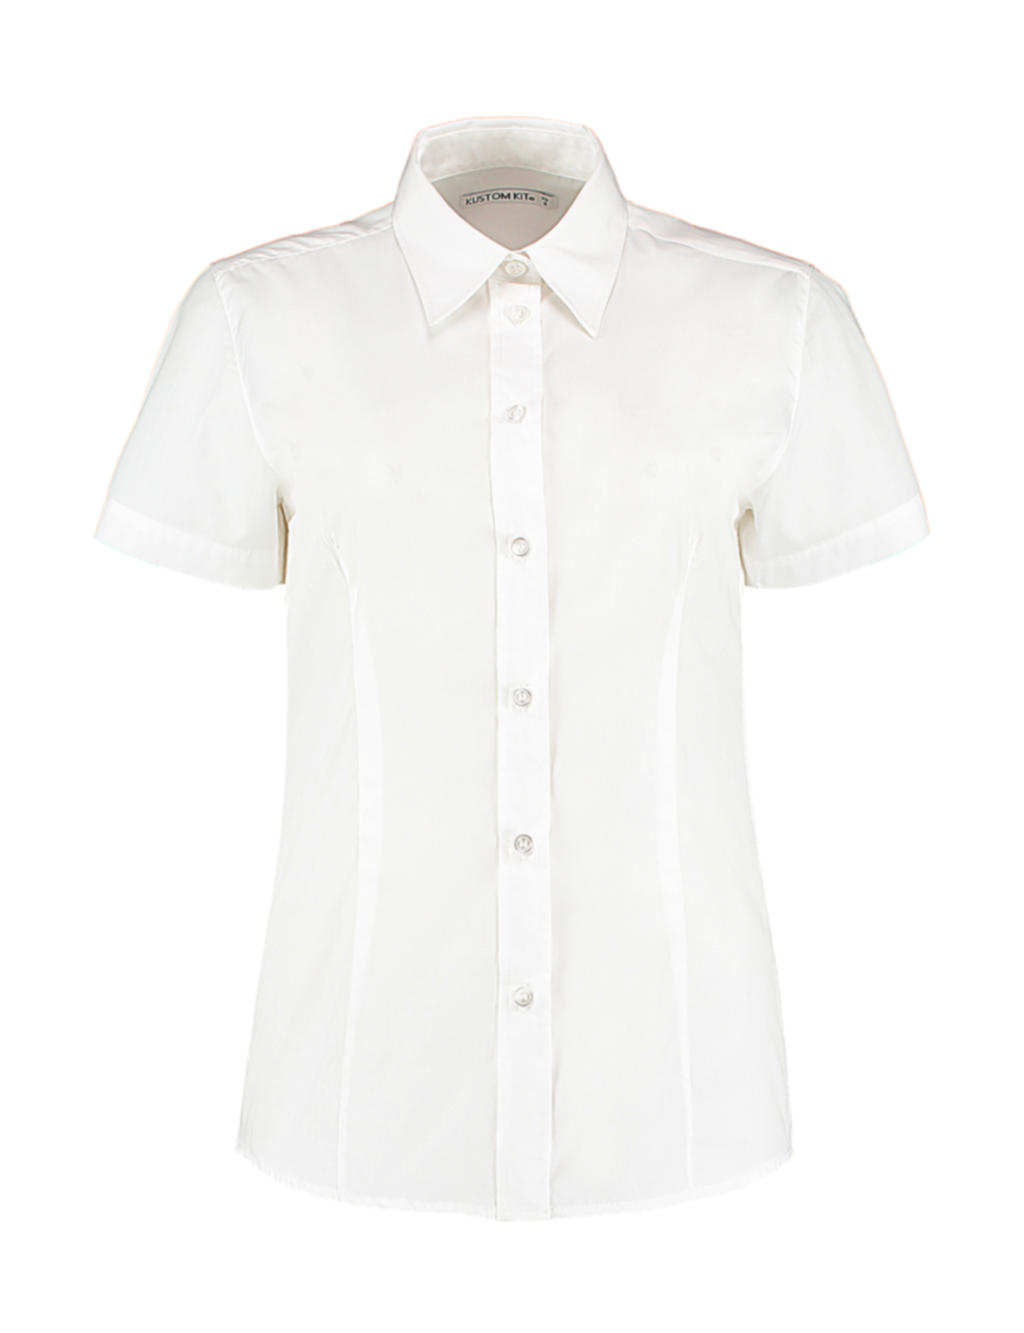  Womens Classic Fit Workforce Shirt in Farbe White